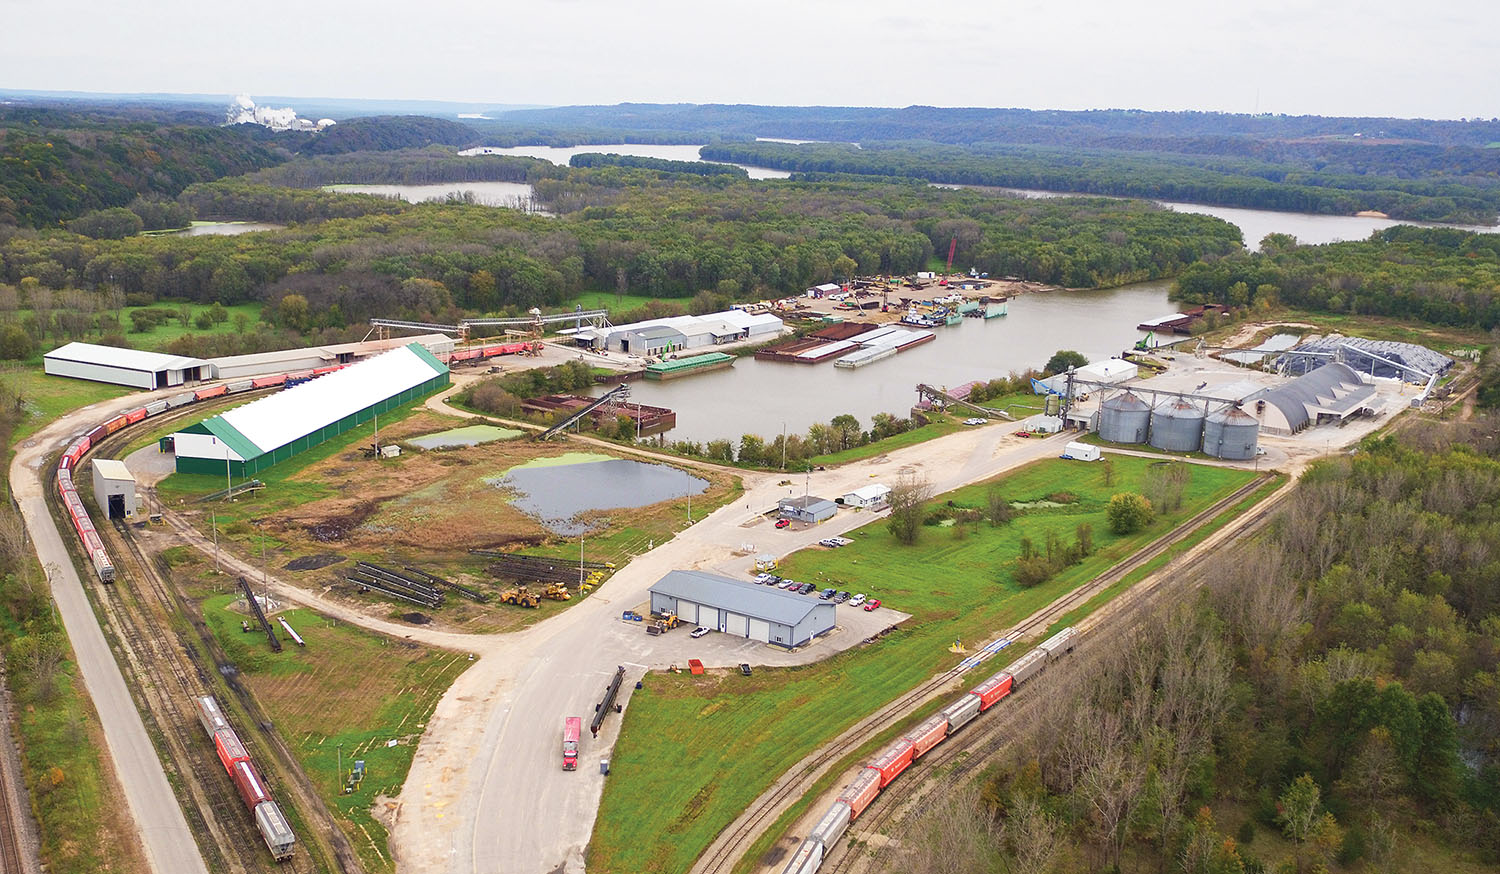 Aerial view of the Logistics Park Dubuque facility, including 20-acre slack water harbor.